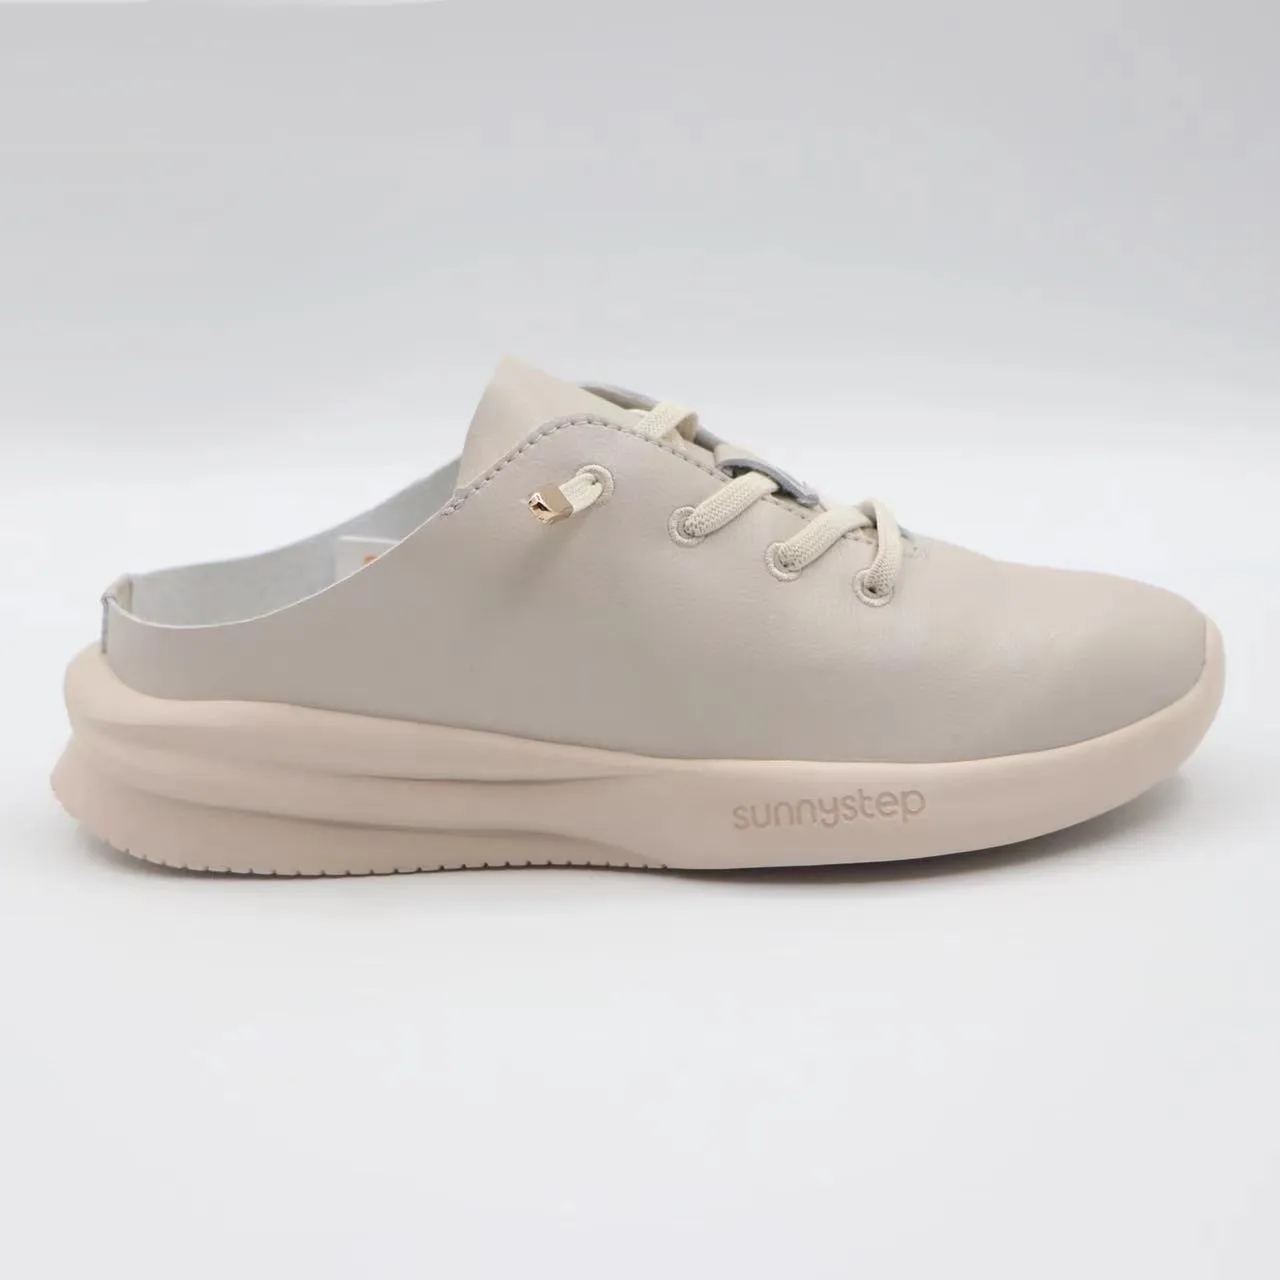 Balance Mules-Sunnystep-The most comfortable walking shoes-Best walking shoes